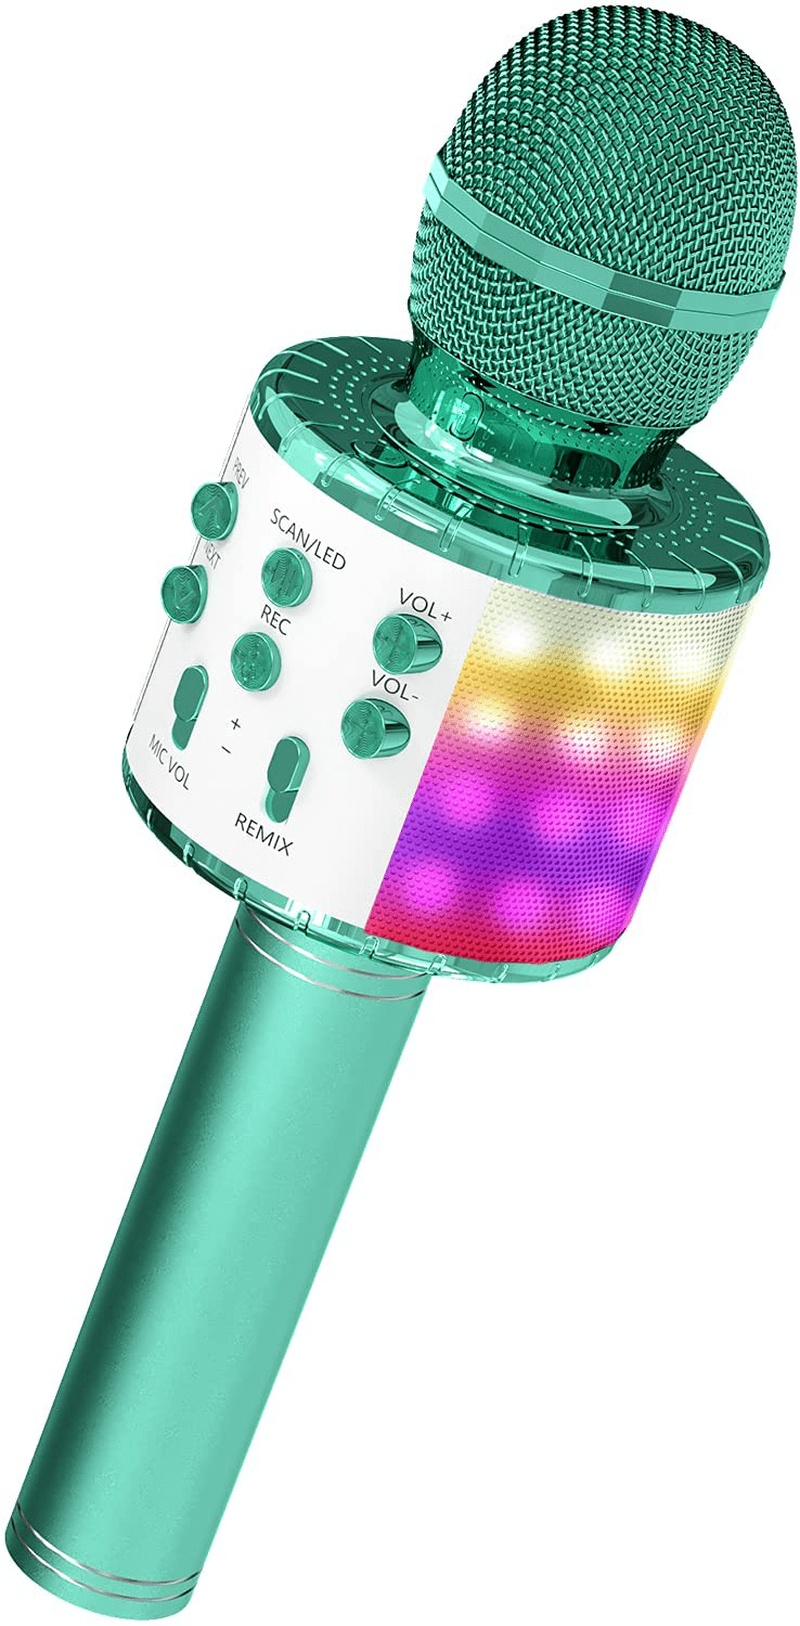 OVELLIC Karaoke Microphone for Kids, Wireless Bluetooth Karaoke Microphone with LED Lights, Portable Handheld Mic Speaker Machine, Great Gifts Toys for Girls Boys Adults All Age (Rose Gold) Electronics > Audio > Audio Components > Microphones OVELLIC Green  